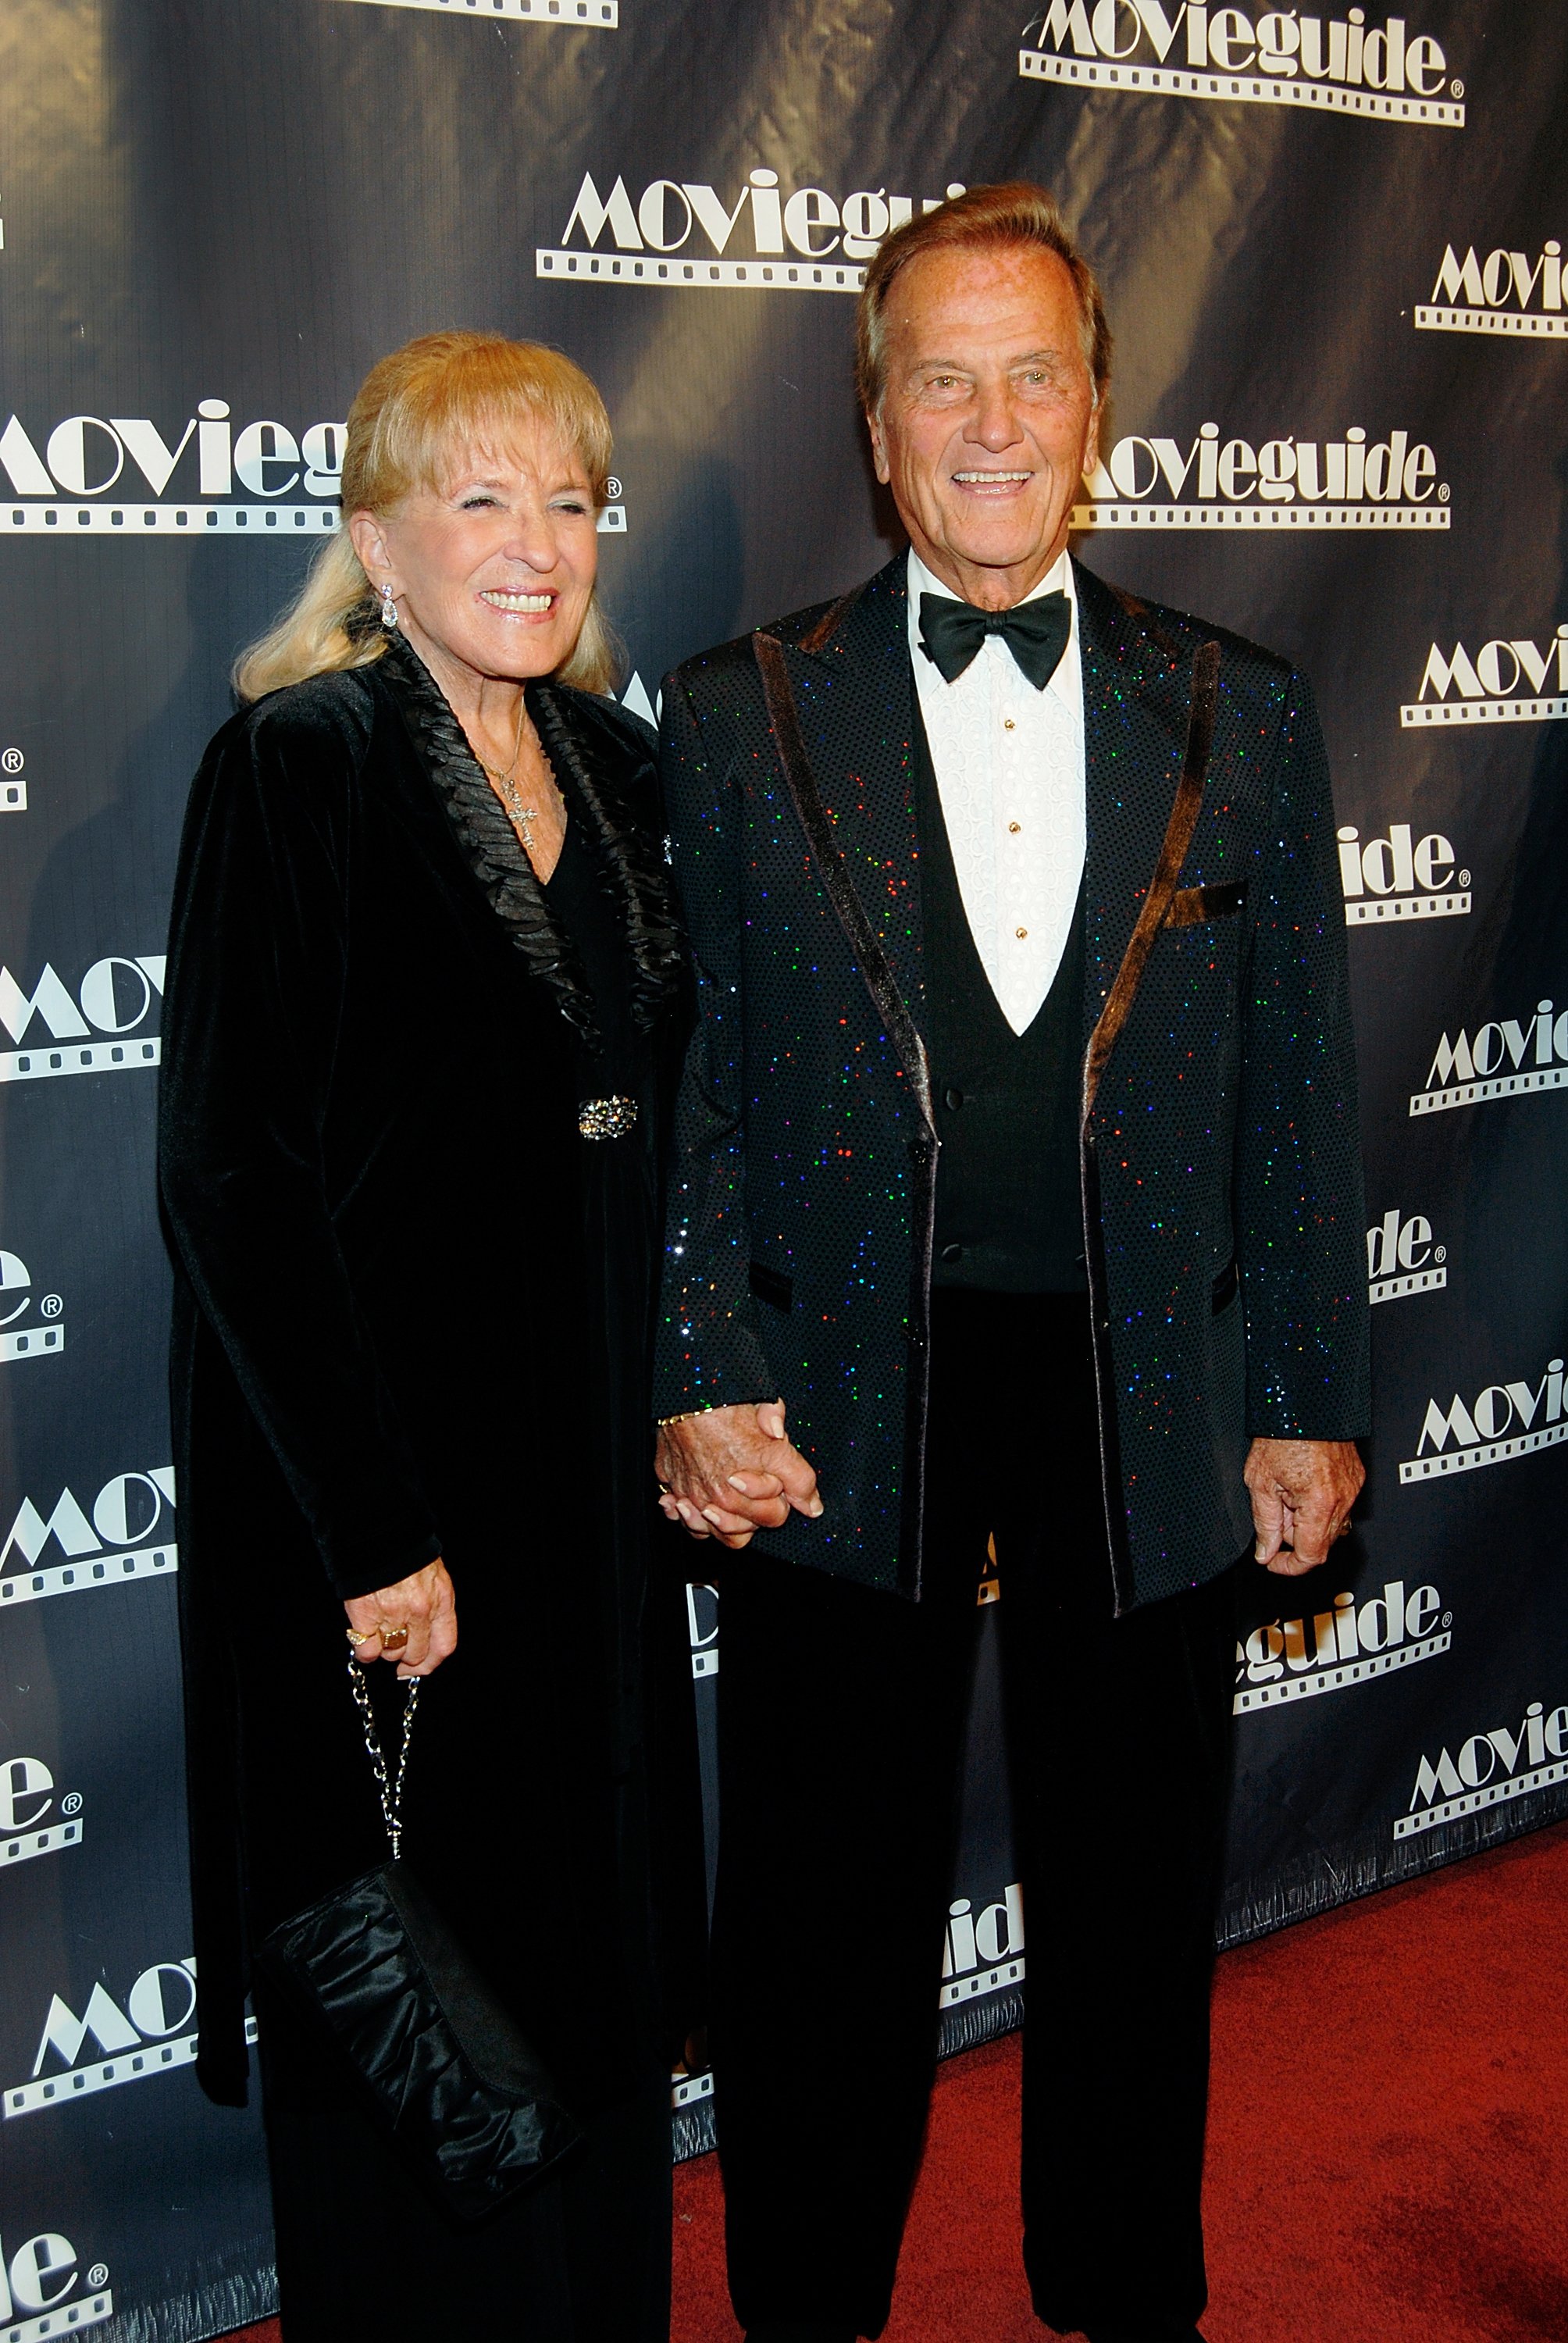 Singer Pat Boone and his wife Shirley arrive at the 19th Annual Movieguide Awards Gala at Universal Hilton Hotel on February 18, 2011 in Universal City, California. | Source: Getty Images